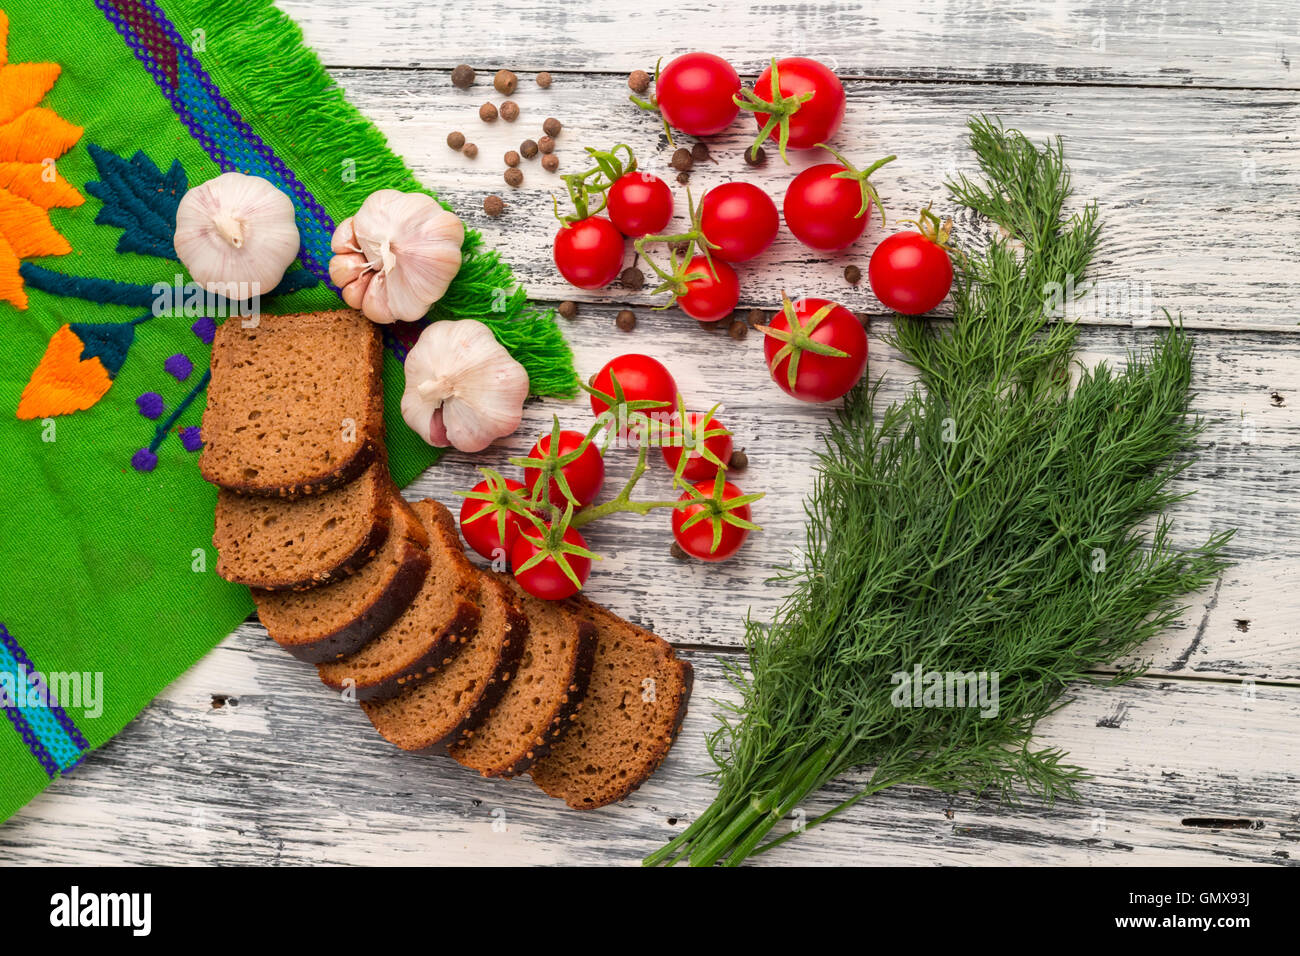 Still life on wooden background: tomatoes, black bread, garlic, fennel, bayberry pepper Stock Photo